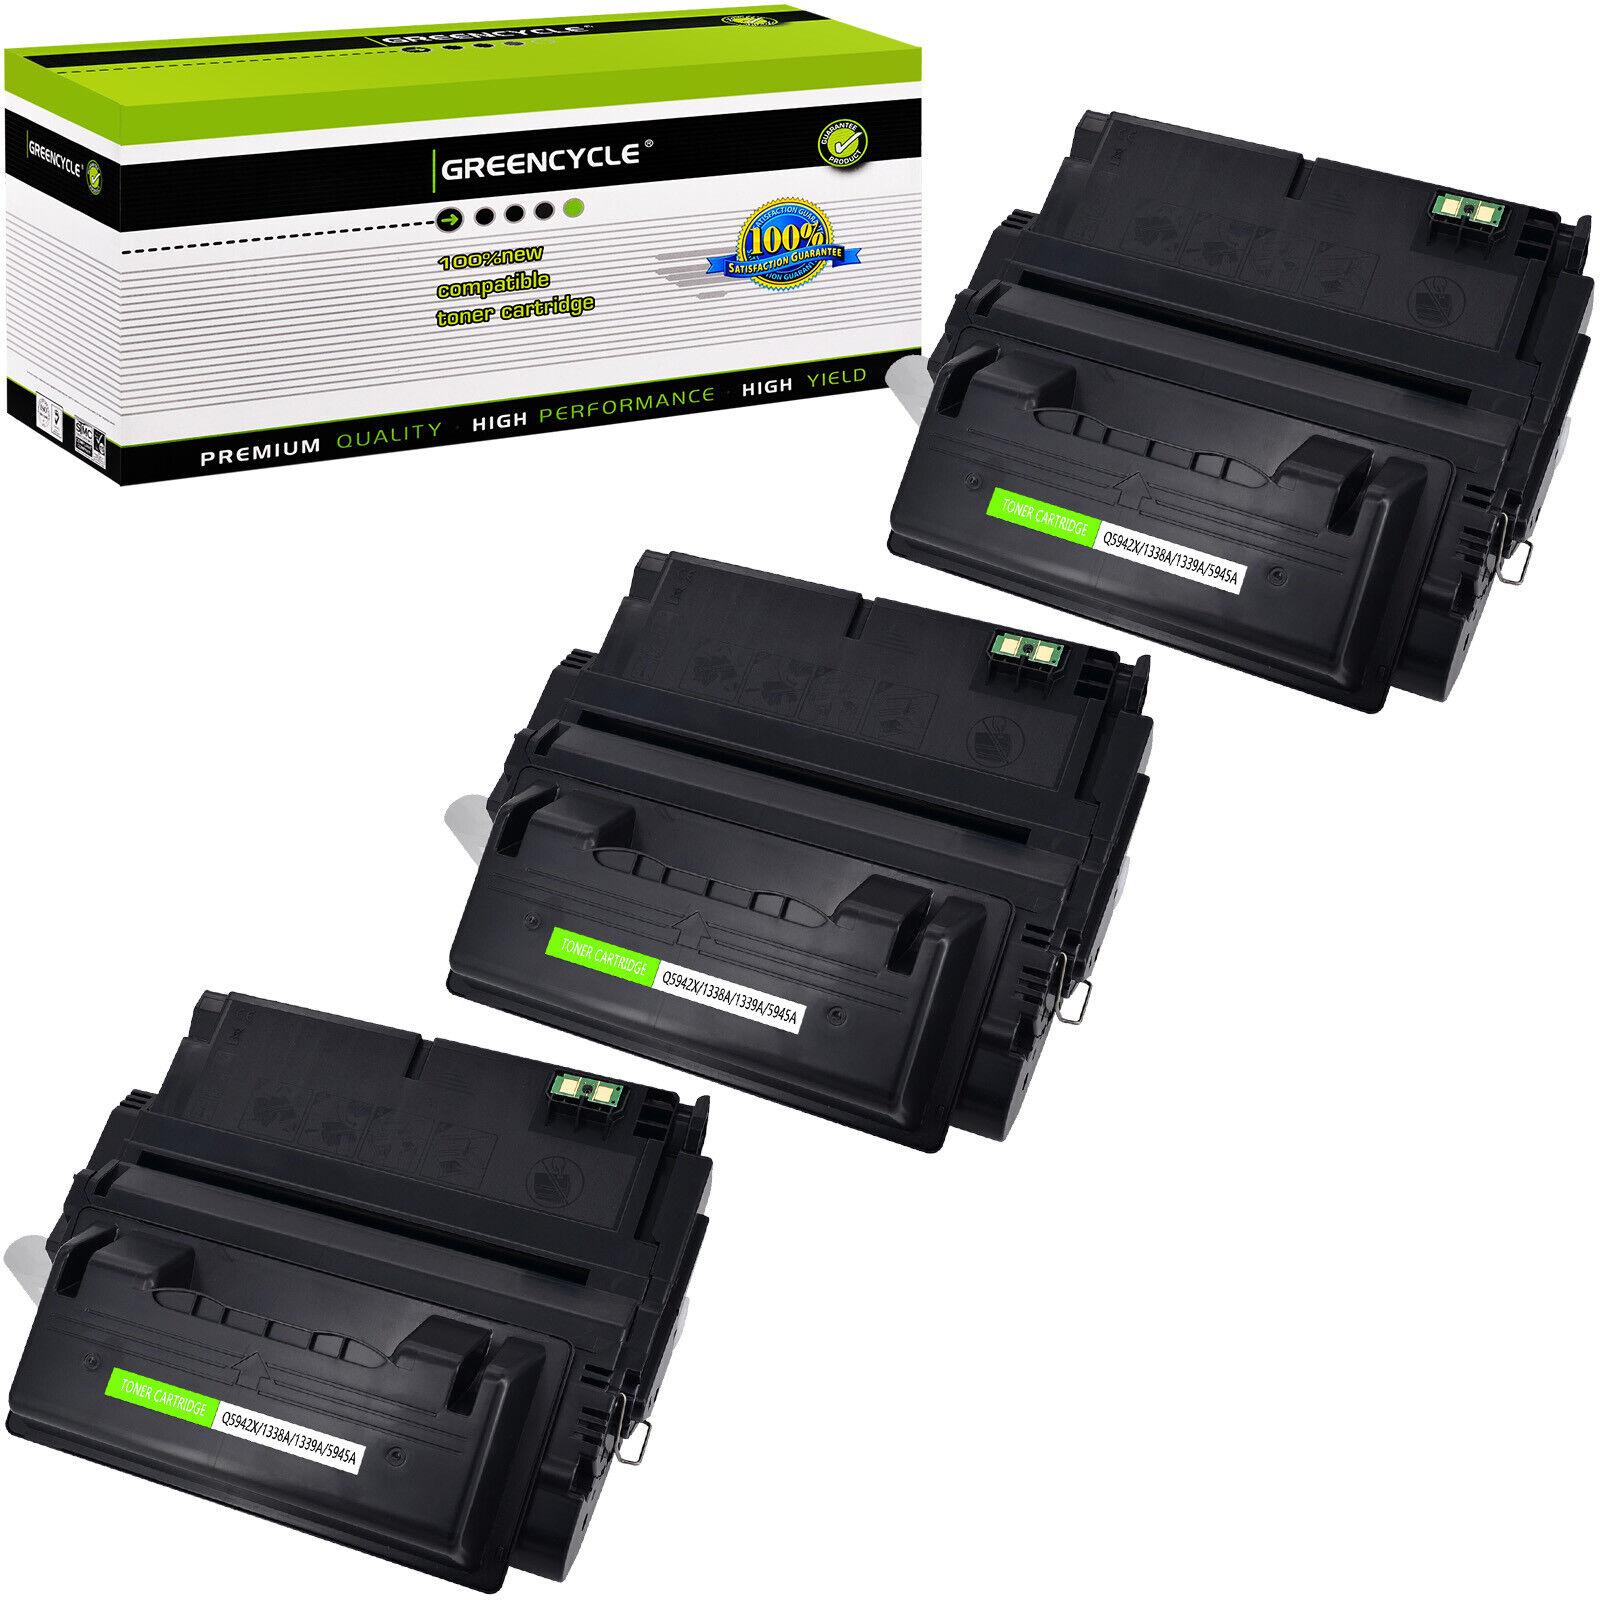 3 Pack High Yield Q1339A 39A Toner Fits for HP LaserJet 4300tn 4300dtn 4300dtns